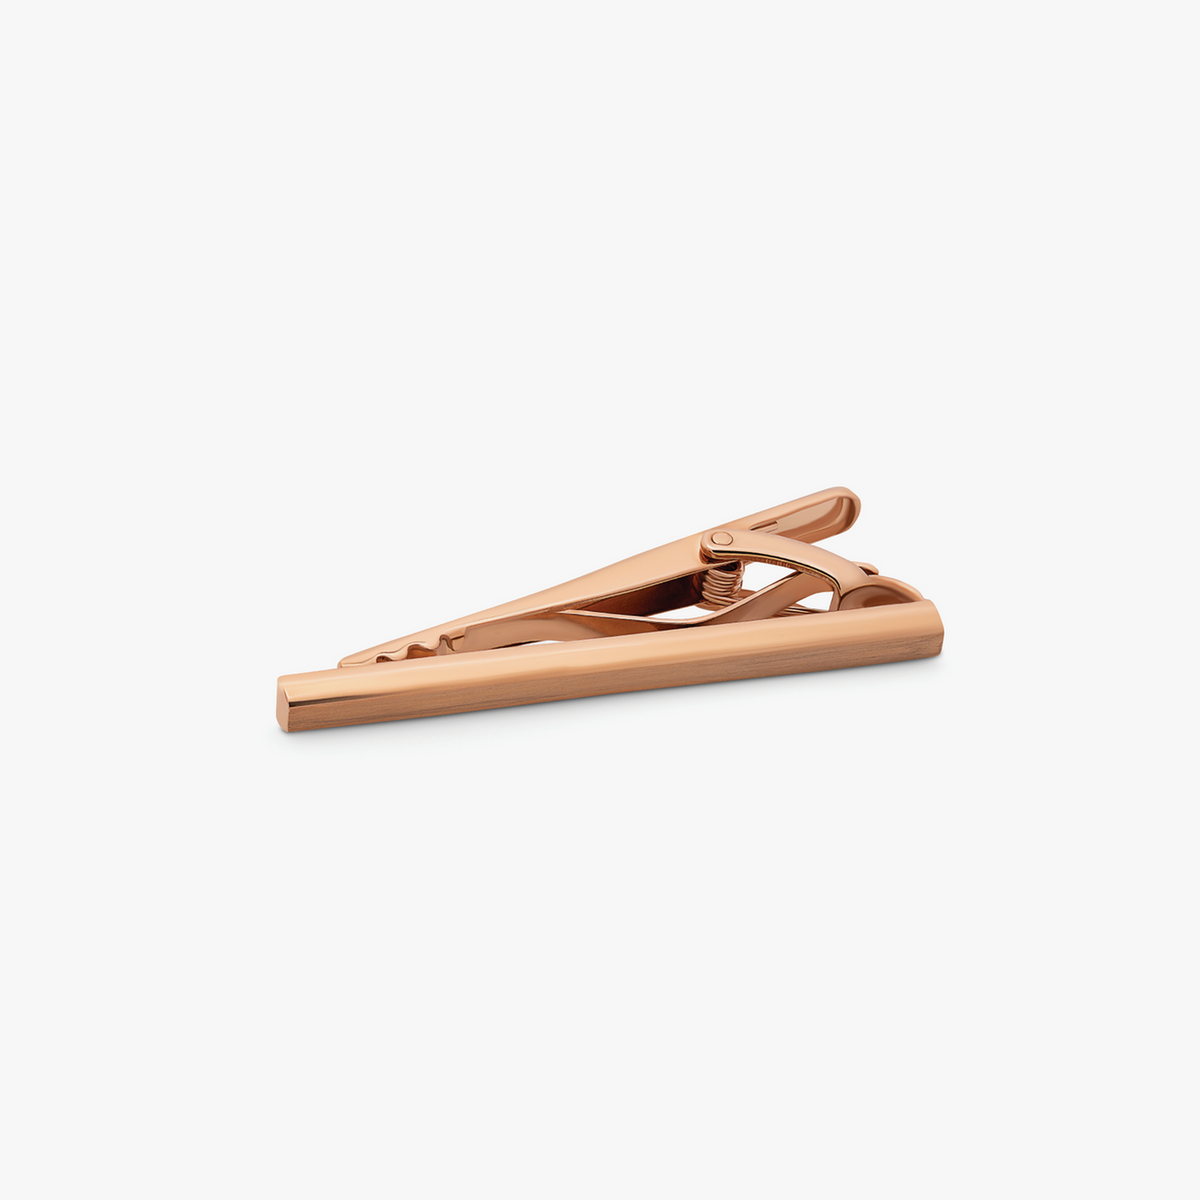 Classic Tie Clip with Brushed Rose Gold Finish-Tie Clip-Tateossian-Cufflinks.com.sg